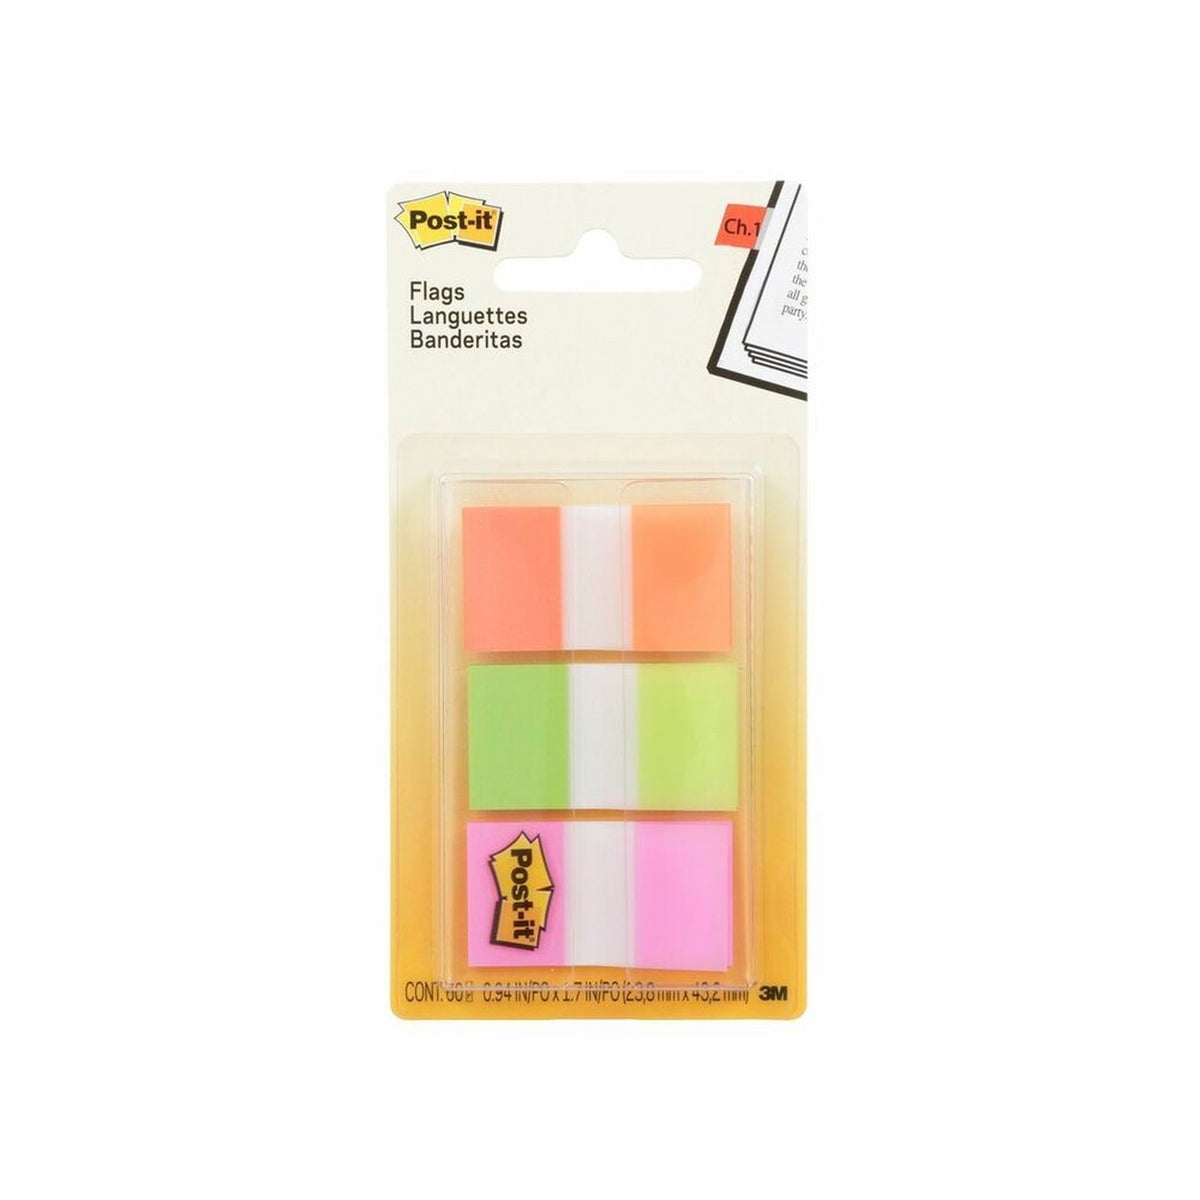 POST-IT 680-OLP INDEX FLAGS 25 X 44MM ASSORTED PACK 3